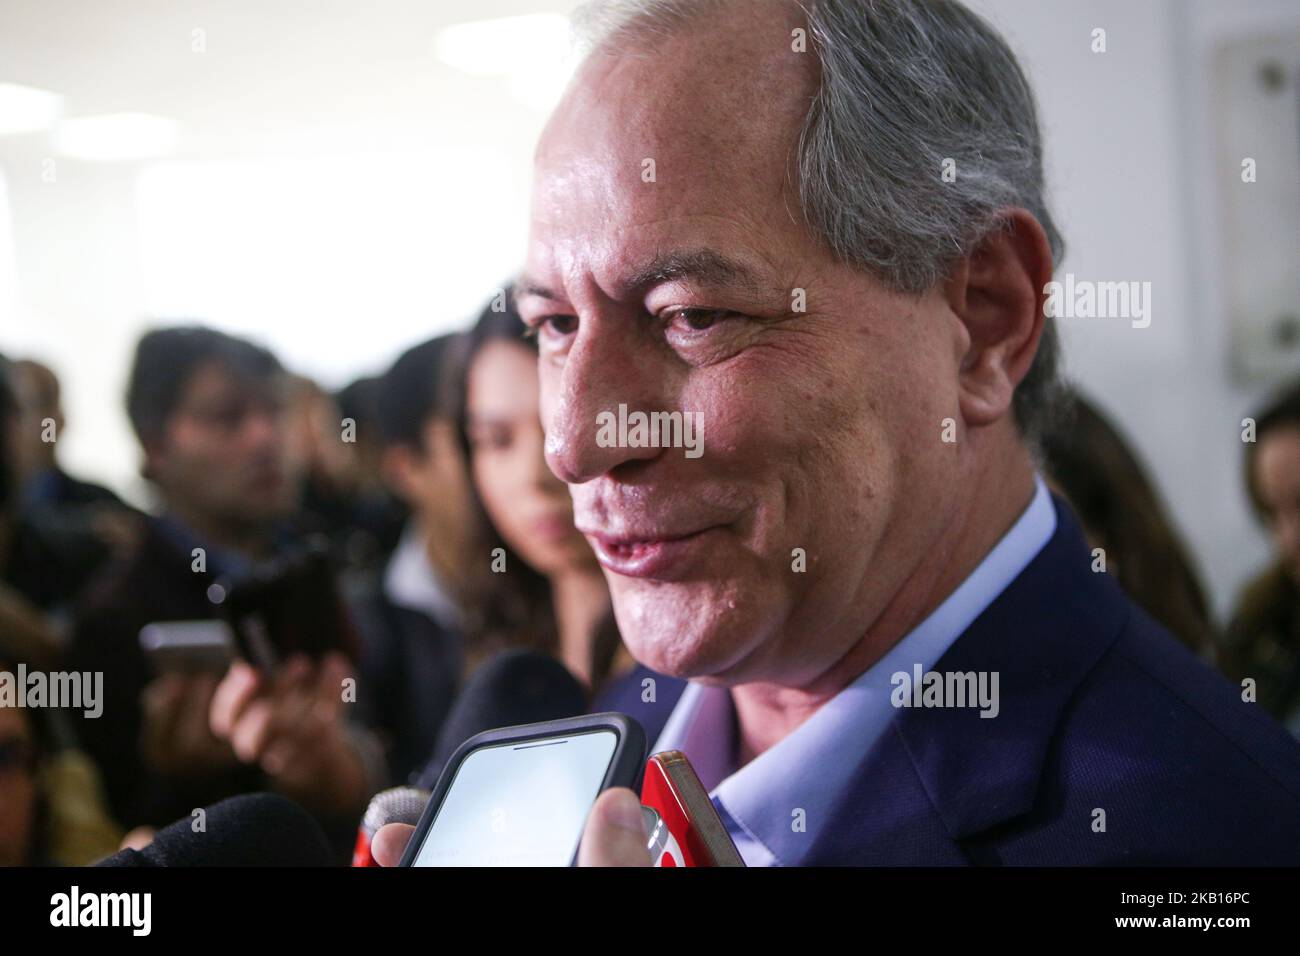 The candidate for the Presidency of the Republic, Ciro Gomes, was at the headquarters of the Brazilian Society for the Advancement of Science (SBPC) in Sao Paulo on September 18, 2018. He answered questions from the scientific community about the plans for ST & I, if elected. (Photo by Dario Oliveira/NurPhoto) Stock Photo